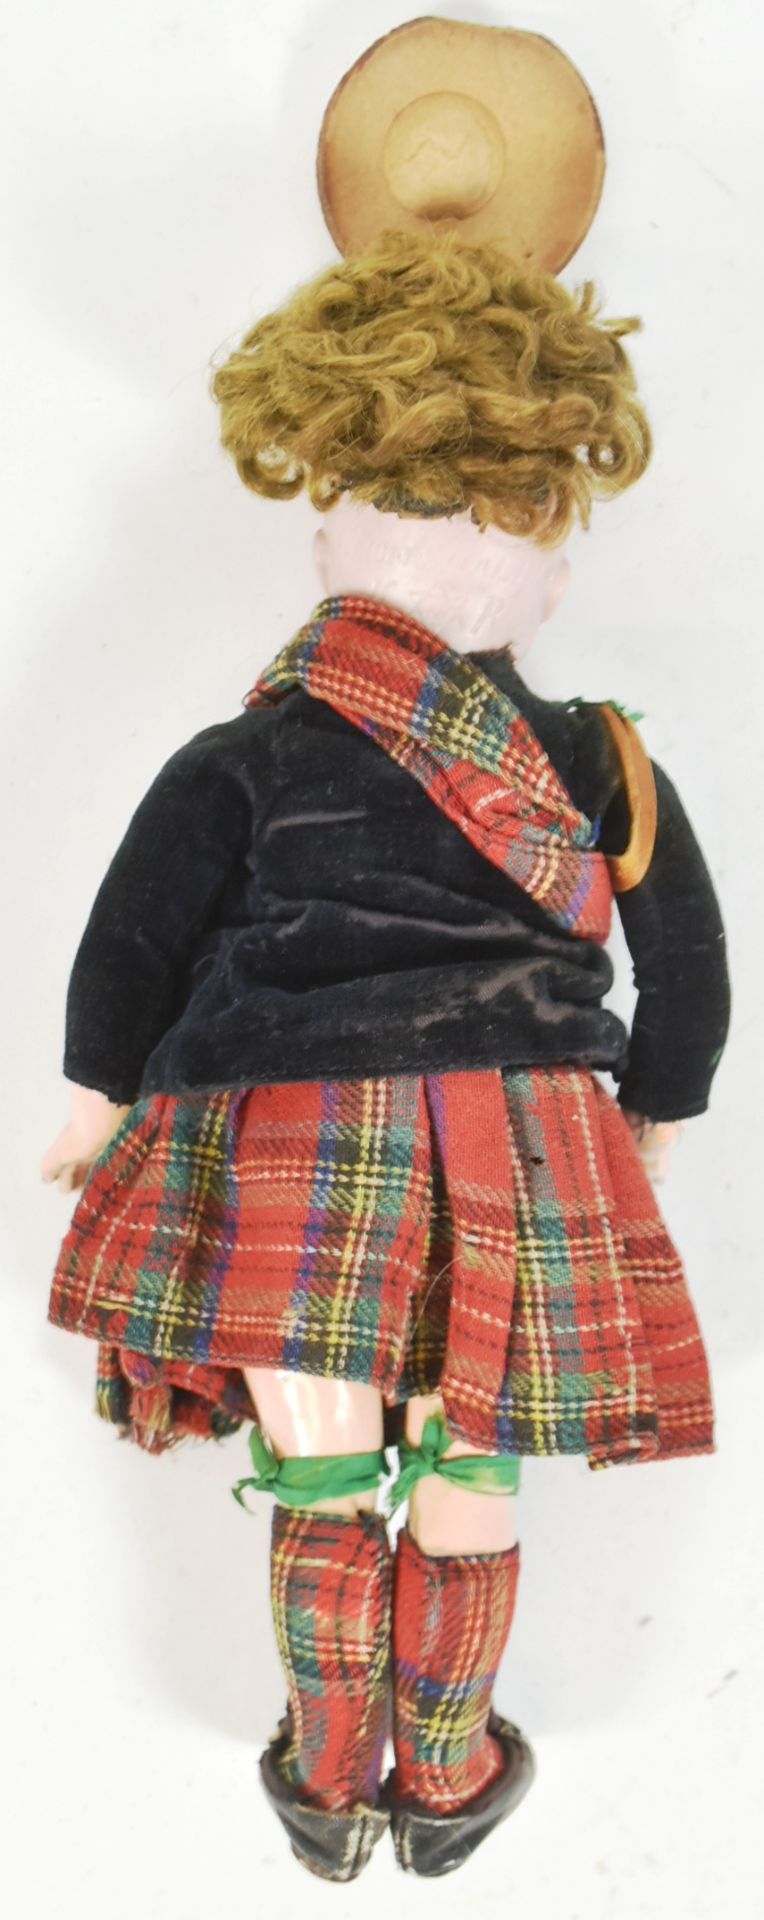 EARLY 20TH CENTURY GERMAN SIMON & HALBIG BISQUE HEADED DOLL - Image 5 of 6